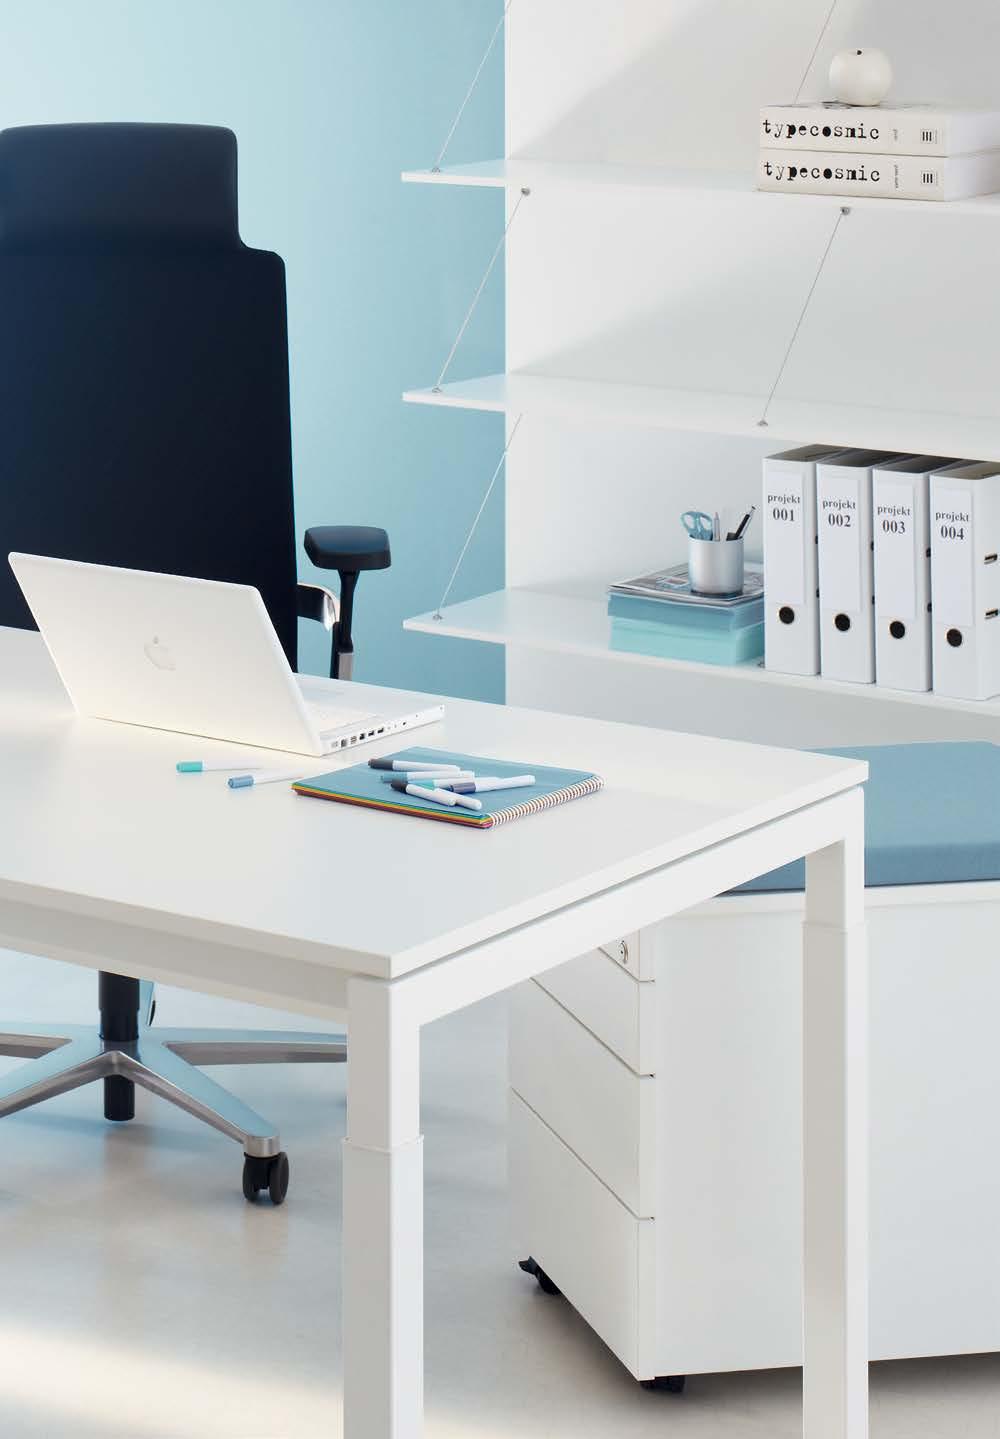 lights and third-level organisation across the entire width of the desk without tools and without obstructing the sliding panel.